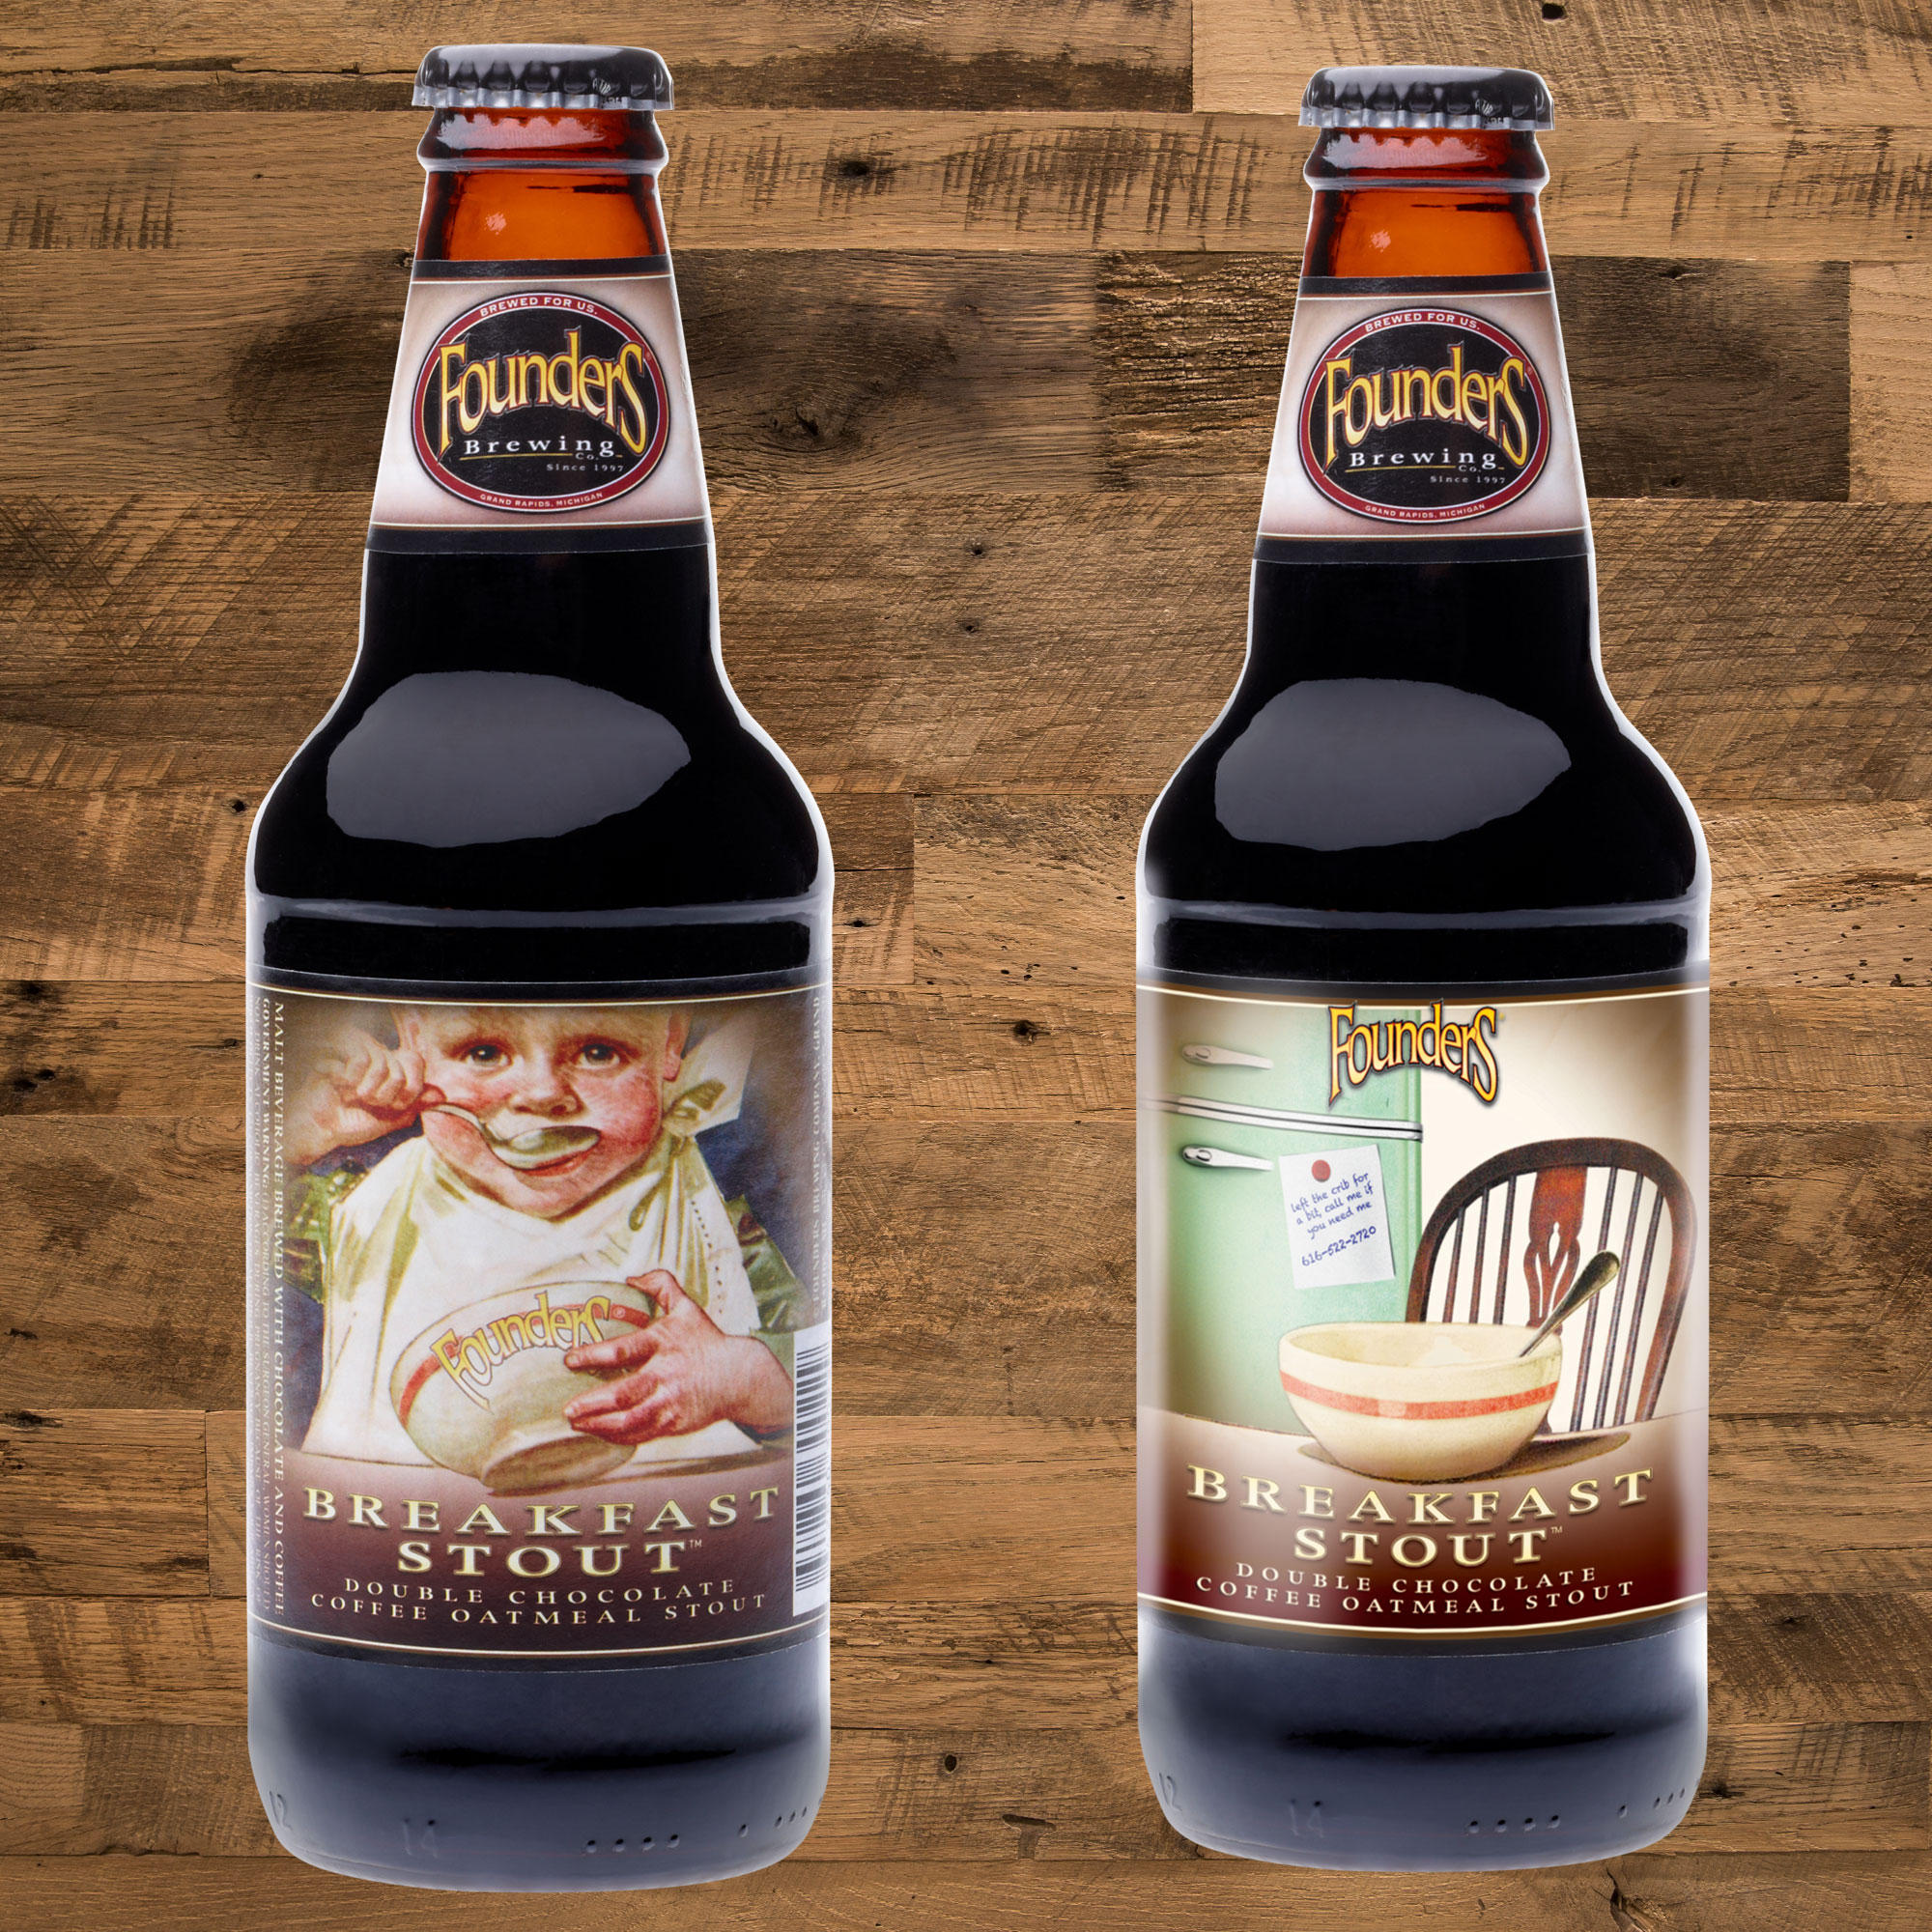 The Founders breakfast stout baby has left the state | Michigan Radio